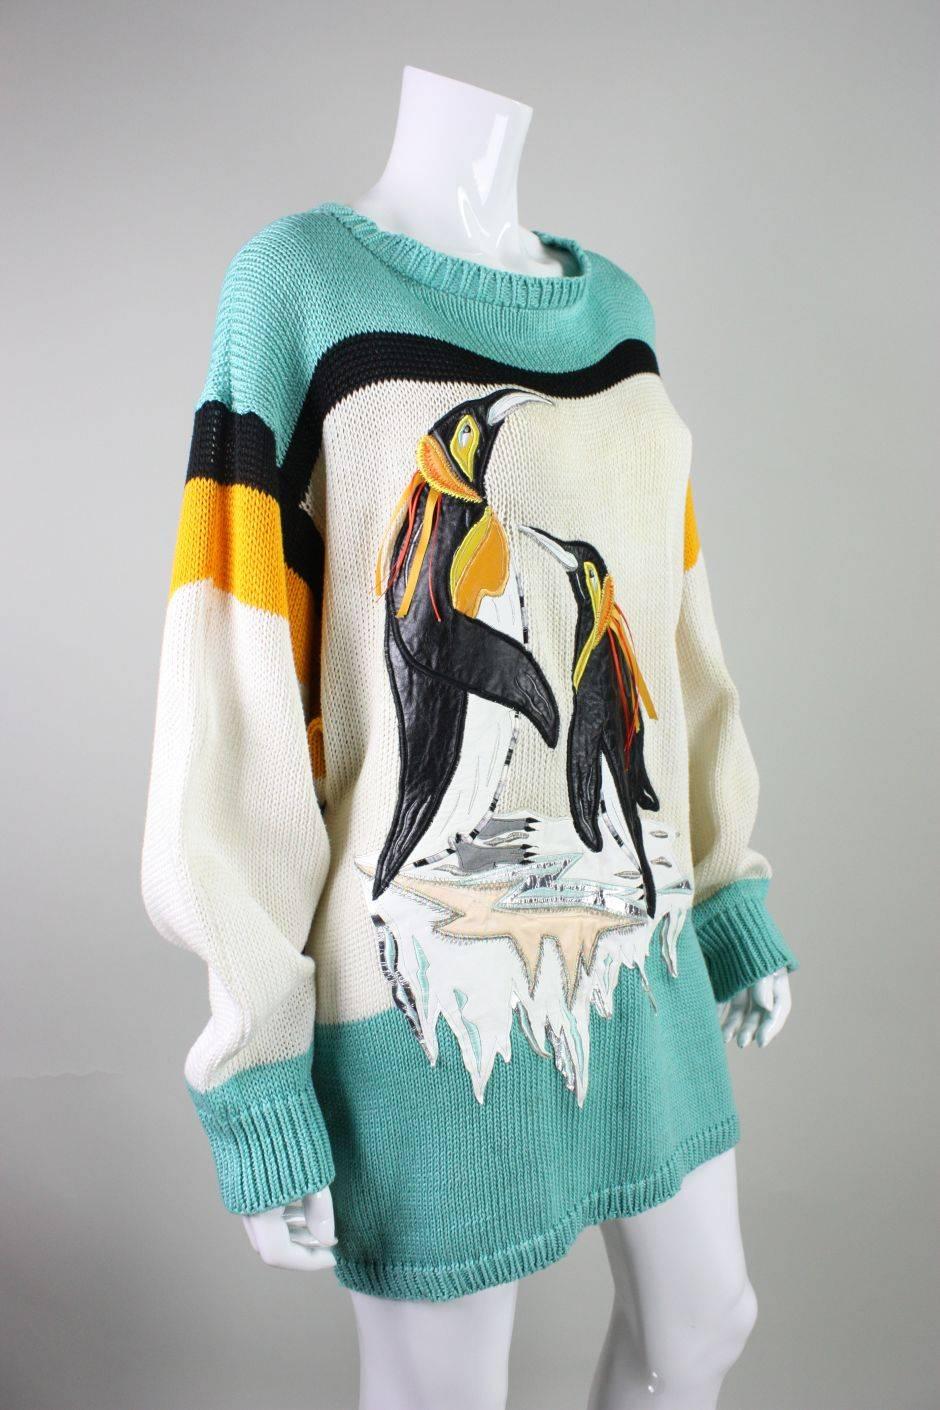 Fun vintage sweater by Szato dates to the 1980's and is made of black, cream, yellow, and turquoise cotton yarn.  The front features large penguins that are artfully appliqued with leather.  Unlined.  No closures. 
Labeled a size Medium, but would